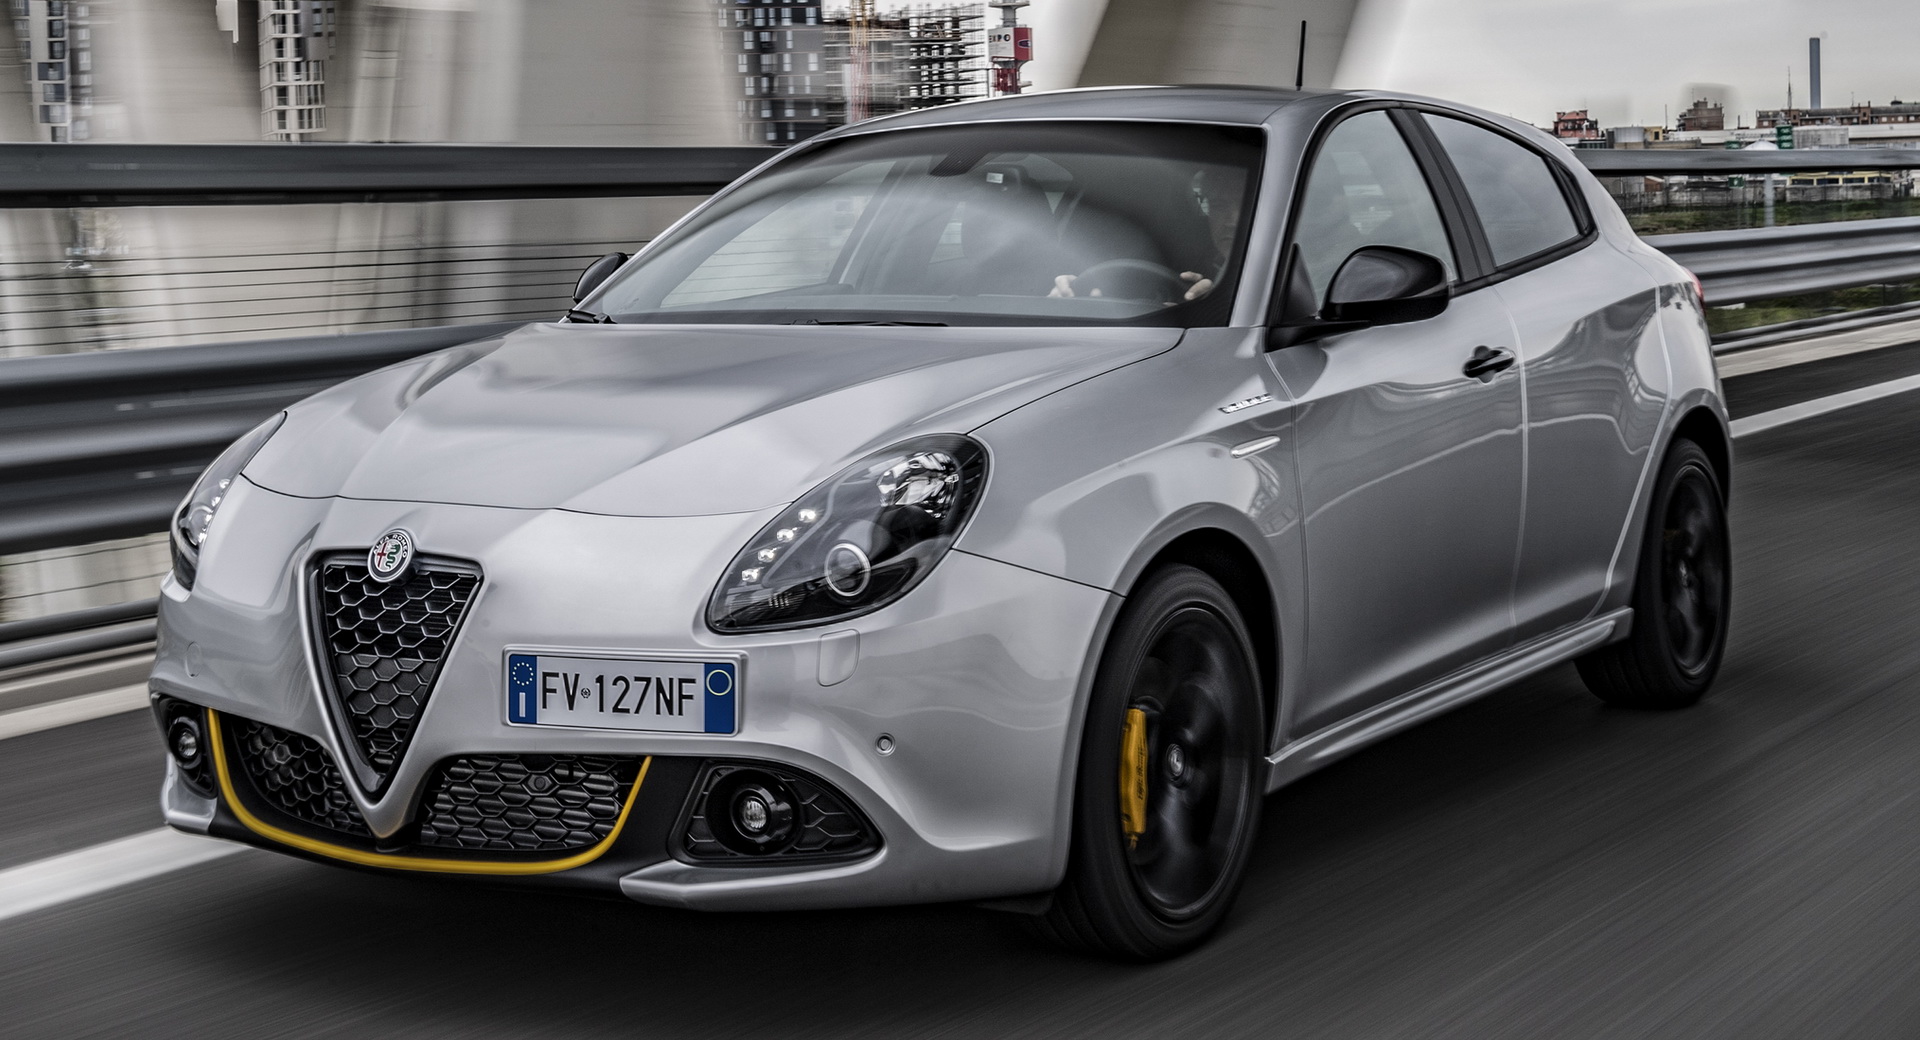 Alfa Romeo To Stop Building The Giulietta As Soon As This Spring?